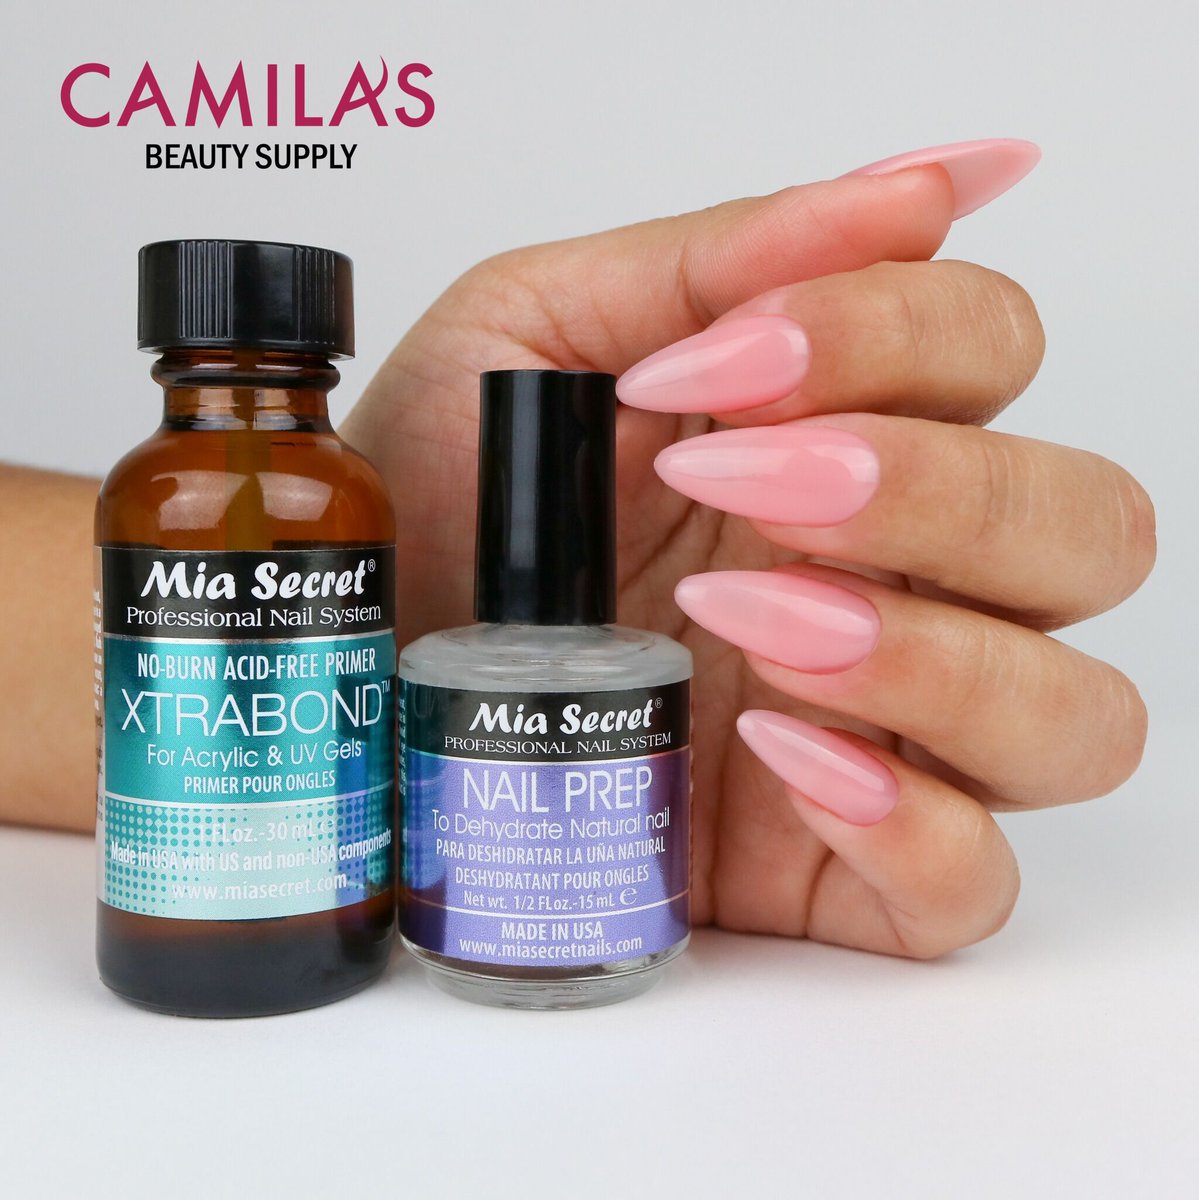 Shop now at Camila's Beauty Supply!! Both Xtrabond and Nail Prep are important steps in the process of applying nail polish, acrylic, or gel. They help to ensure that the nail product will adhere properly and last longer.#MiaSecretlovers #OPInails #Salerm21boost #Luminarynailsyst